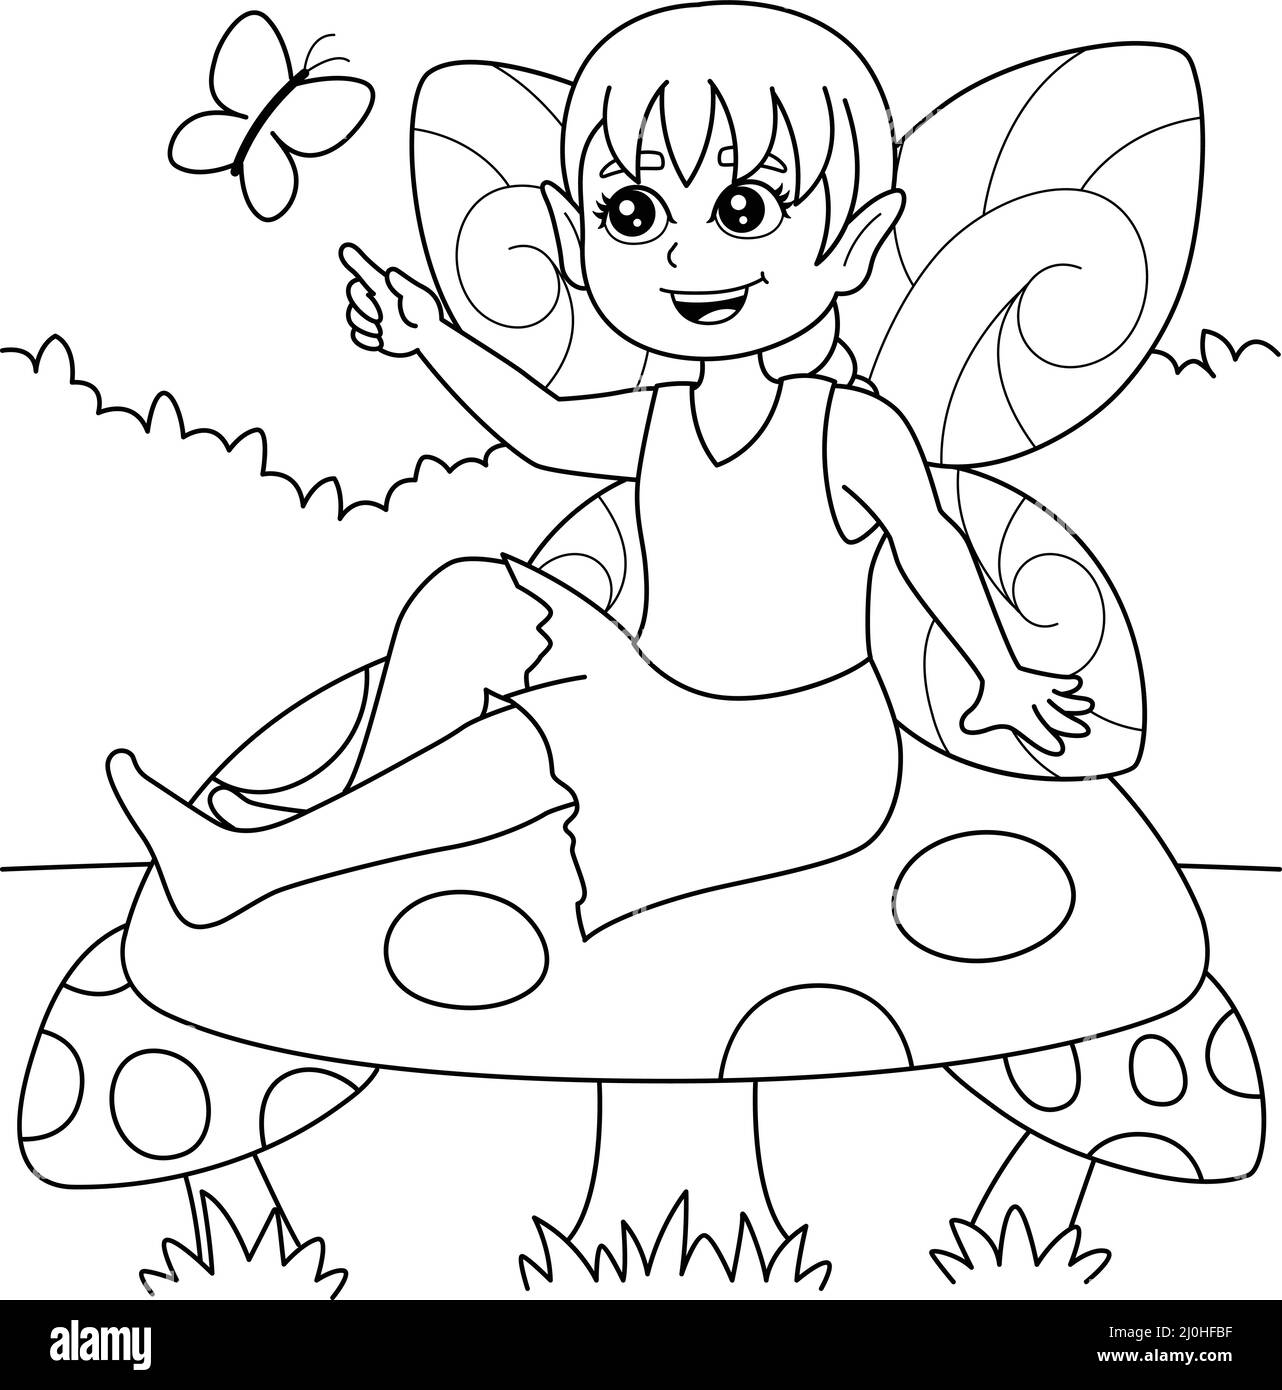 Fairy Sitting On A Mushroom Coloring Page for Kids Stock Vector